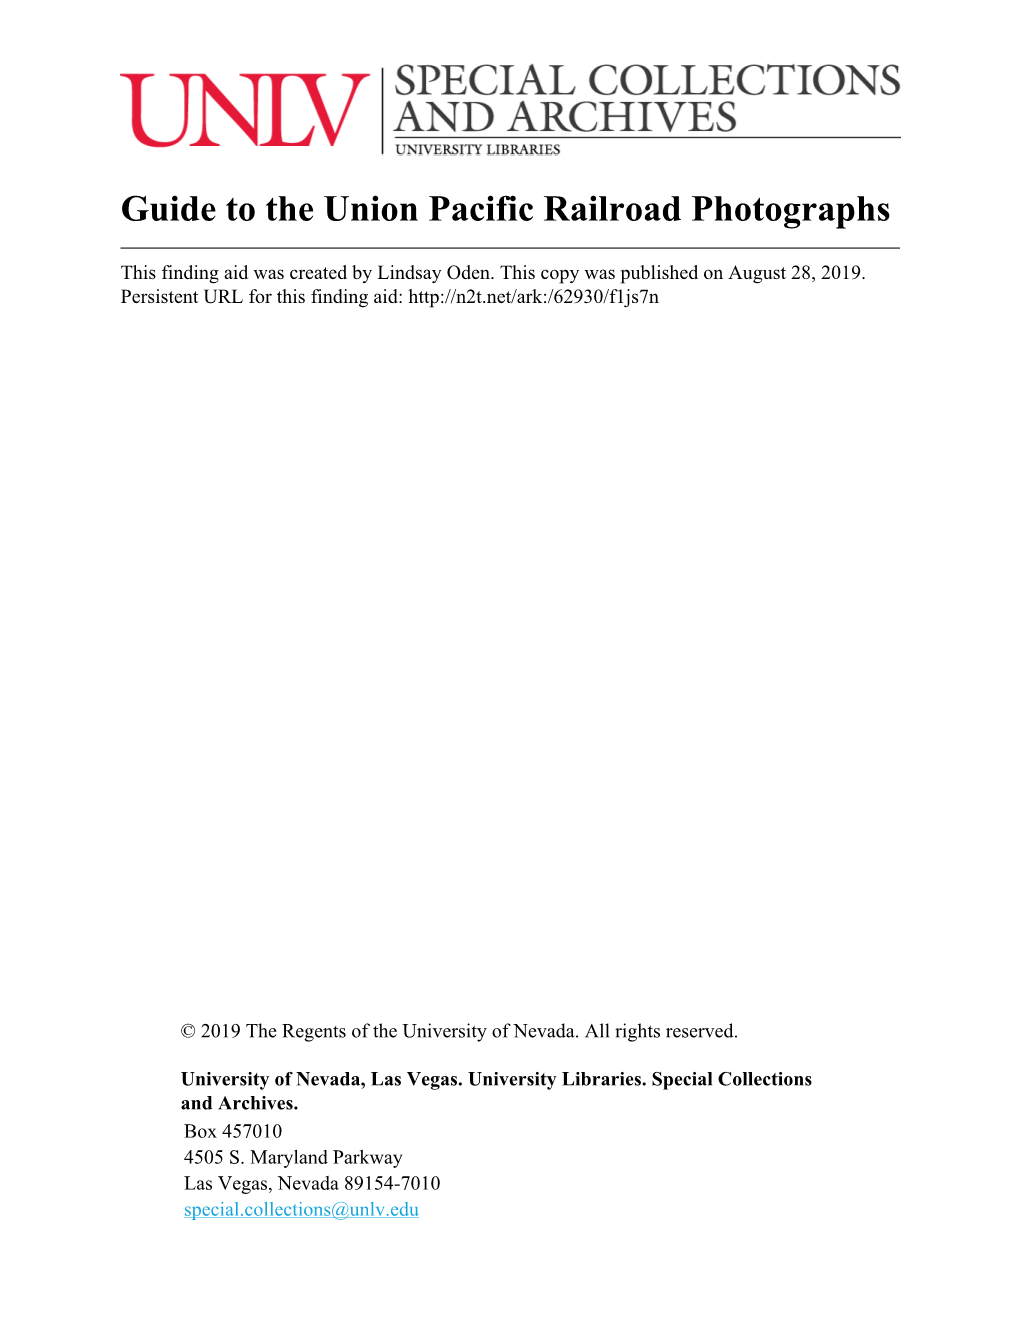 Guide to the Union Pacific Railroad Photographs